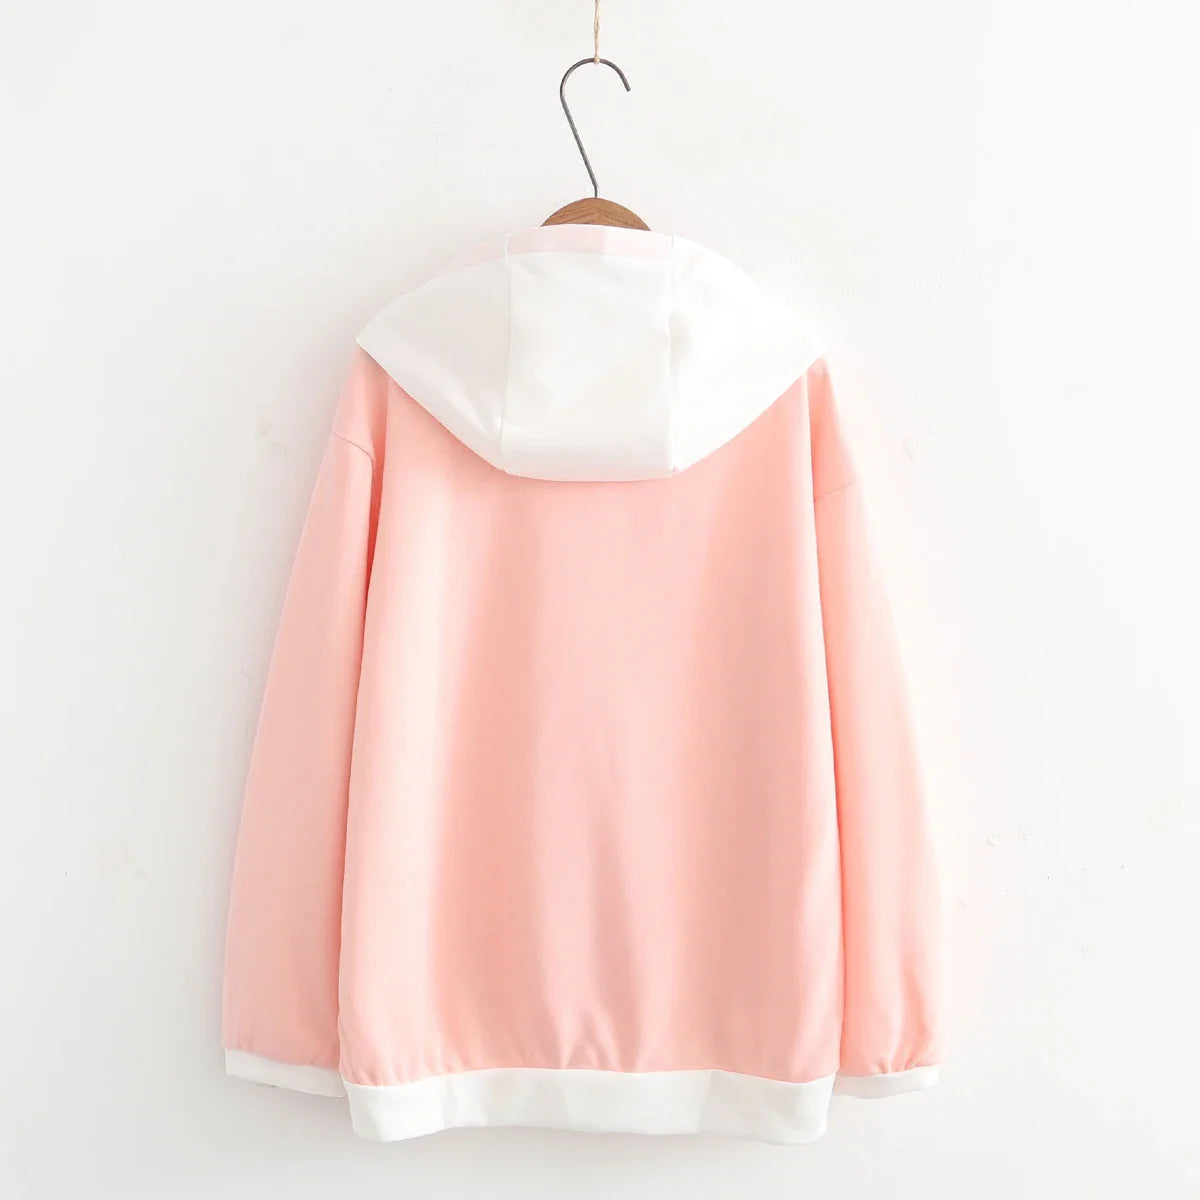 Kawaii Bunny Rabbit Cherry Blossom Hoodie - Pink / One Size - Women’s Clothing & Accessories - Shirts & Tops - 2 - 2024